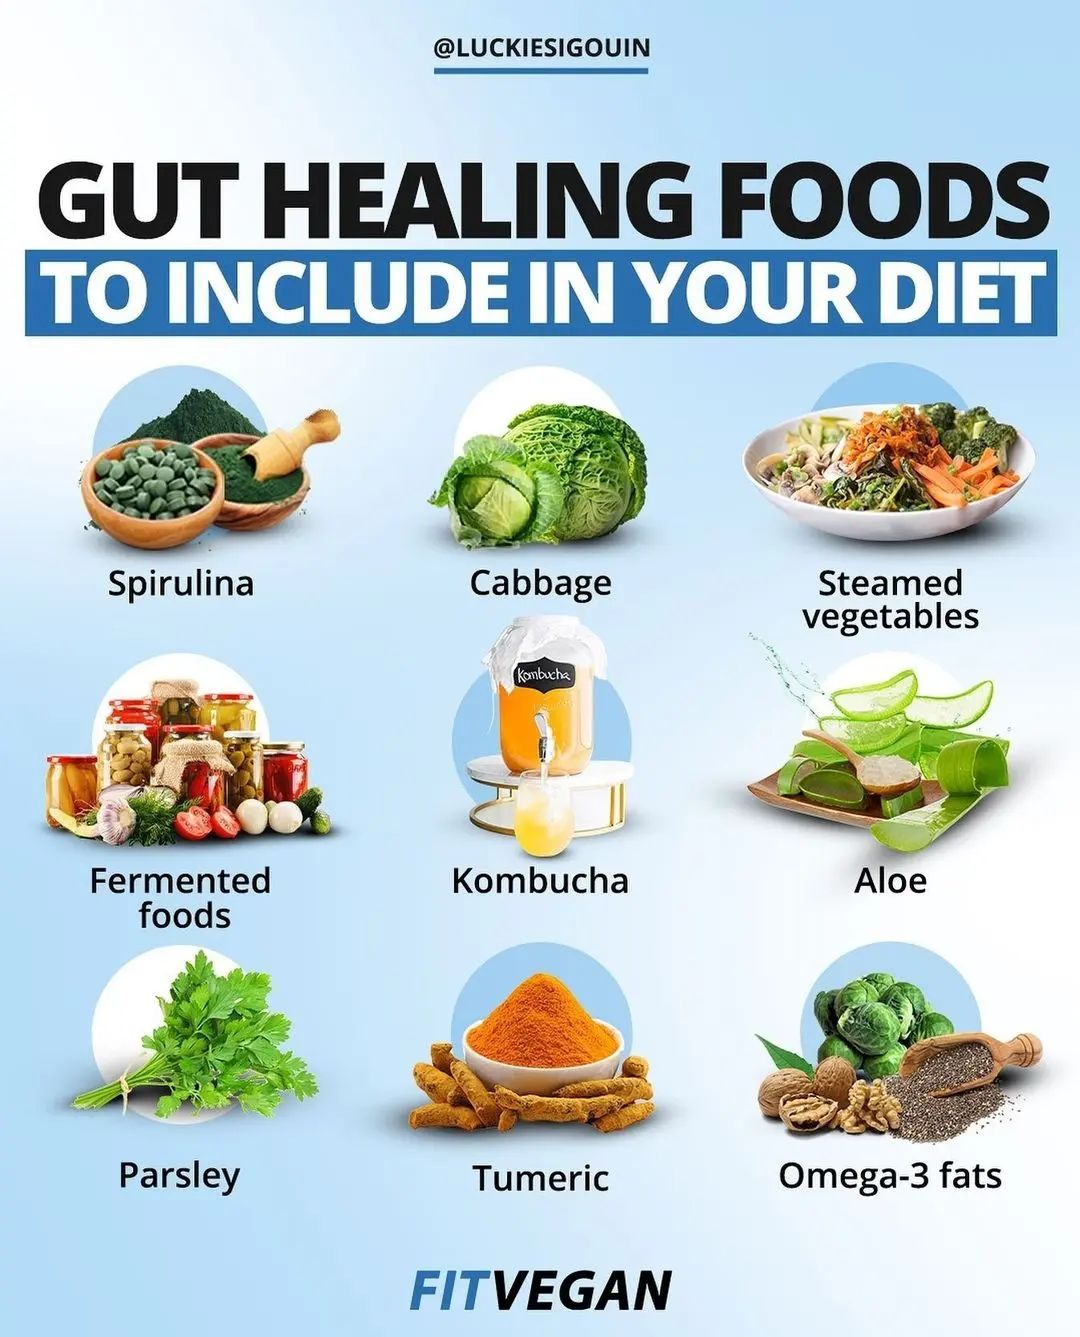 gut-healing-foods-to-include-in-your-diet-conveganence